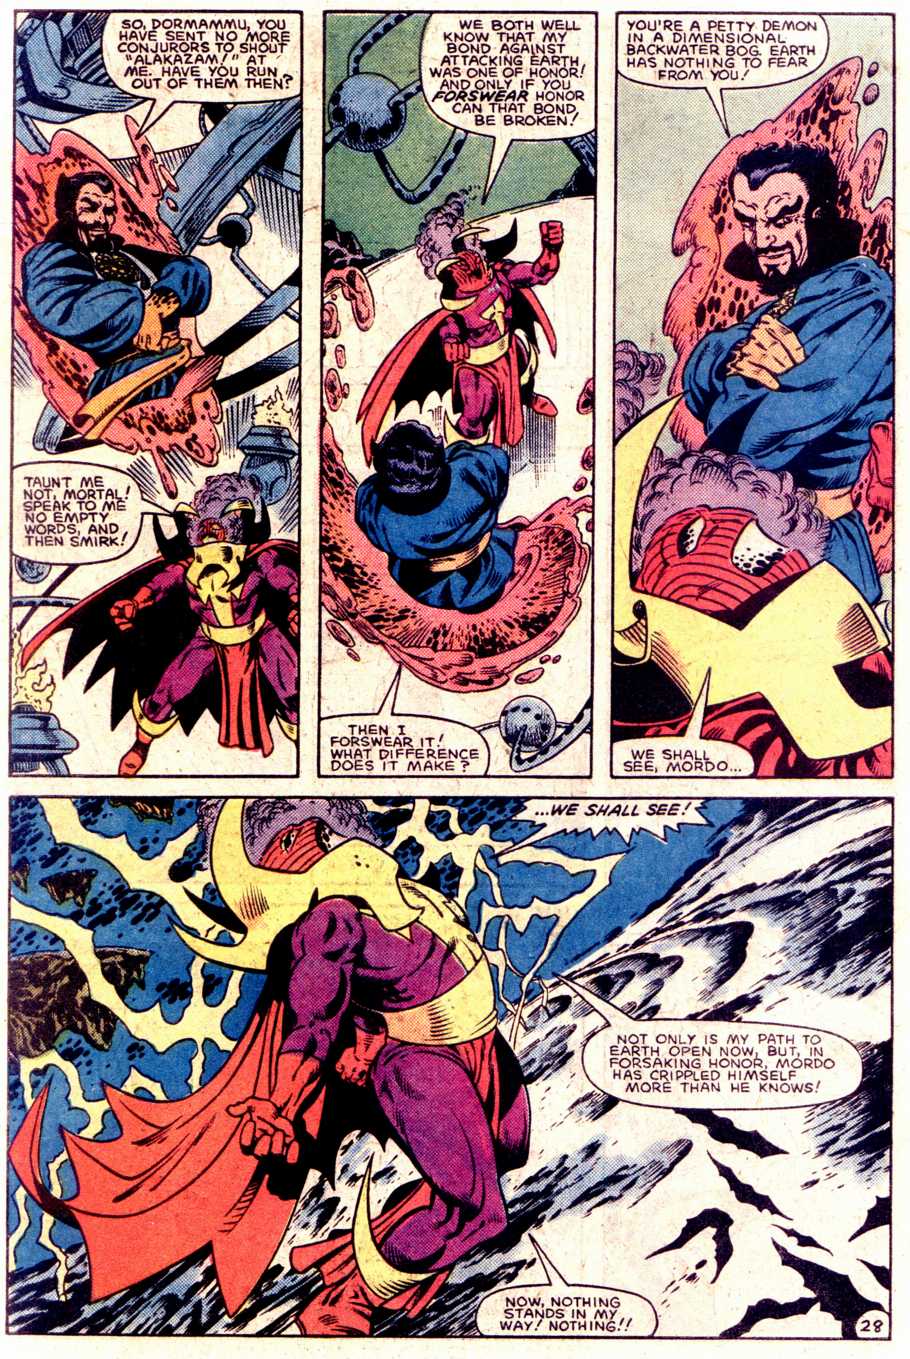 What If? (1977) issue 40 - Dr Strange had not become master of The mystic arts - Page 29